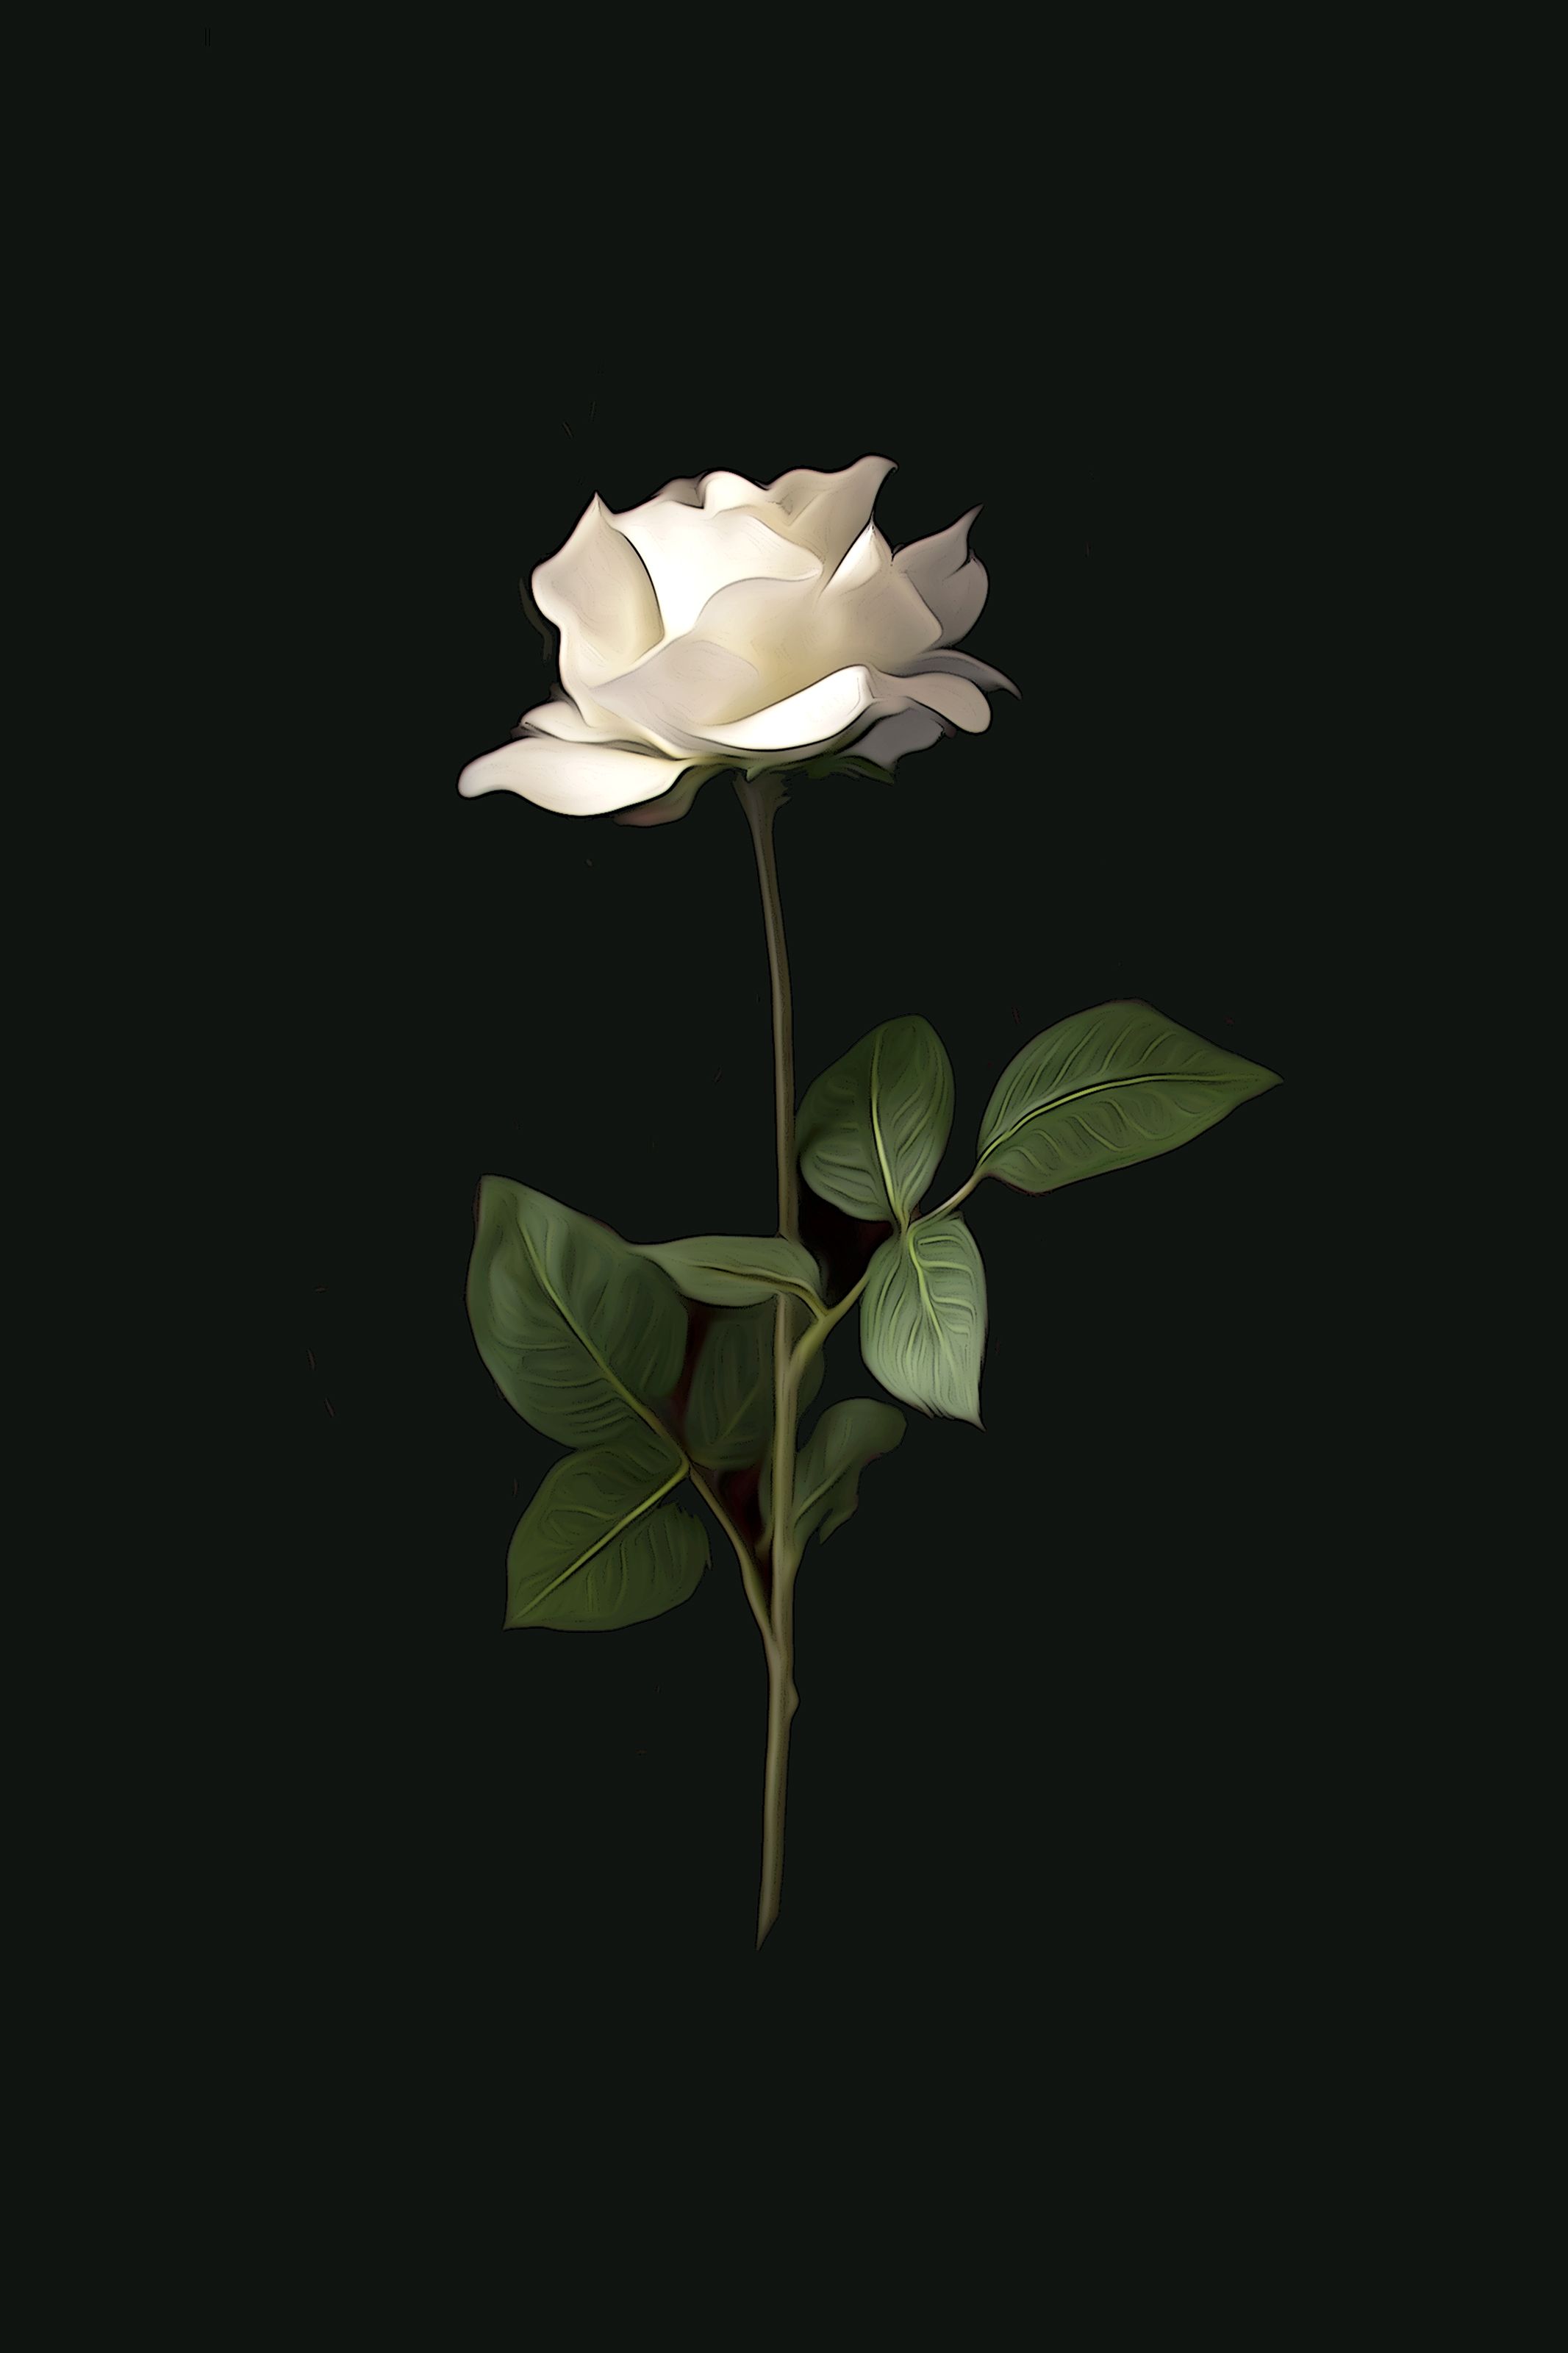 Beautiful White Rose With Black Background , HD Wallpaper & Backgrounds